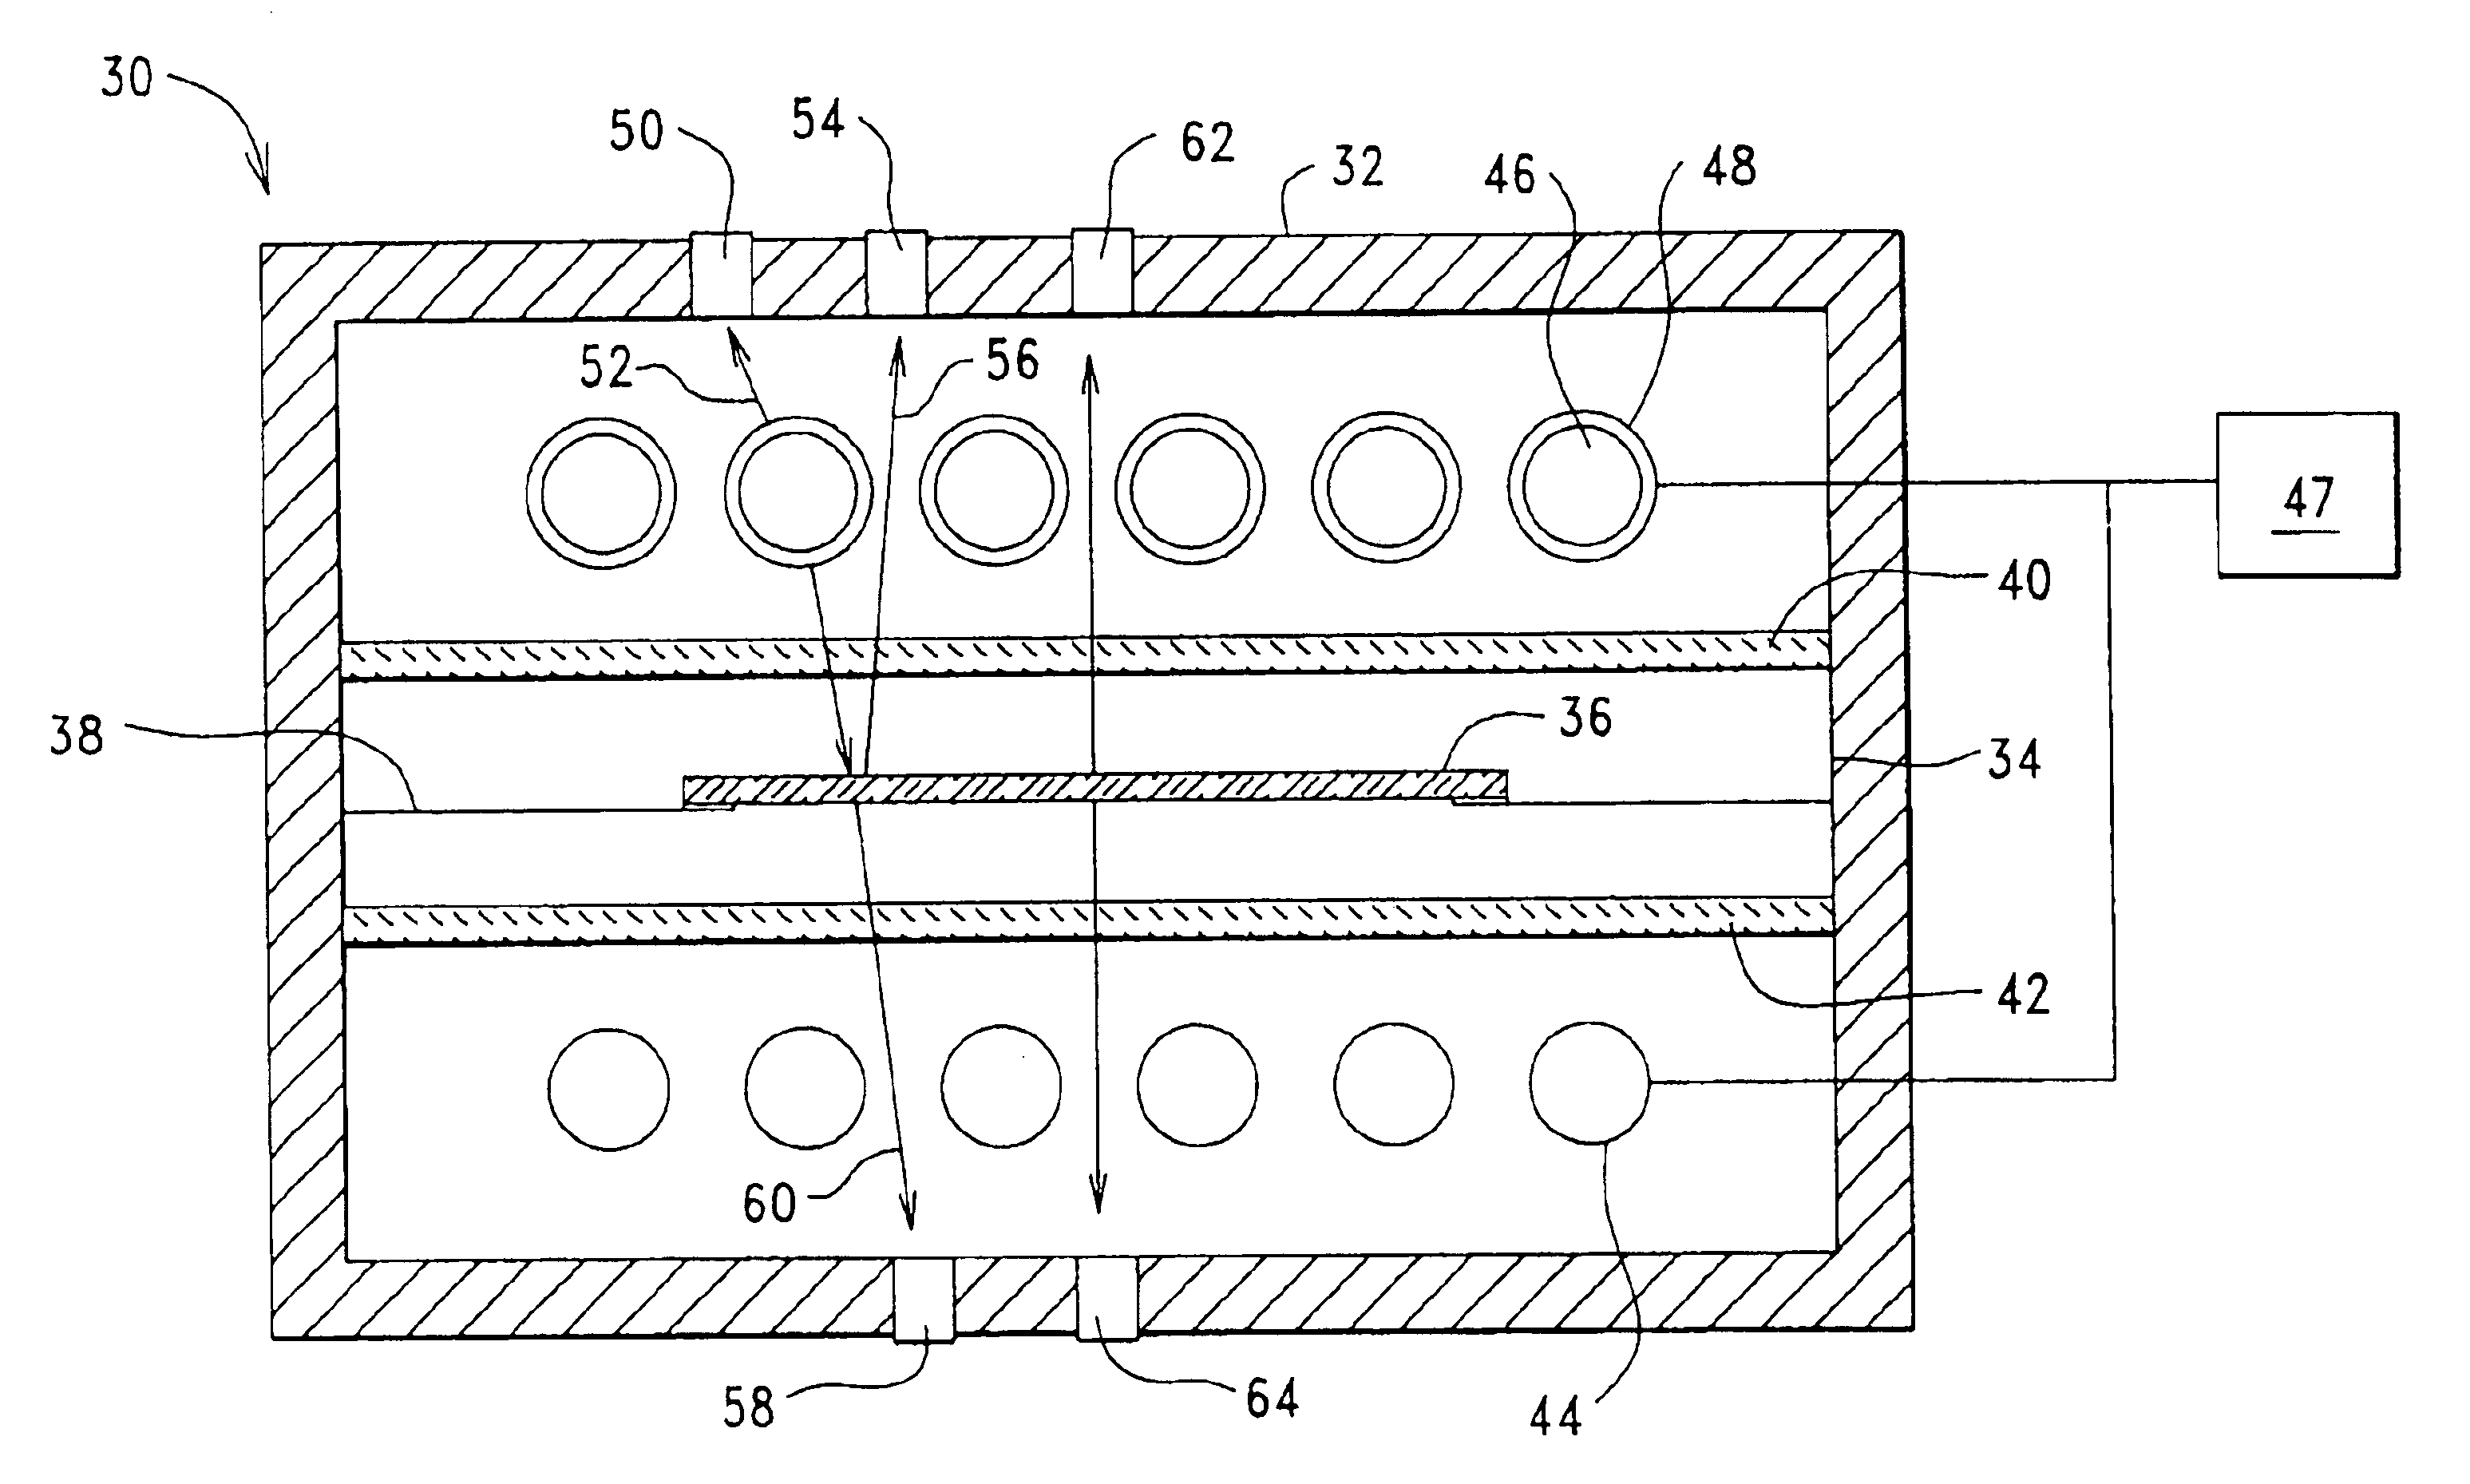 Pulsed processing semiconductor heating methods using combinations of heating sources